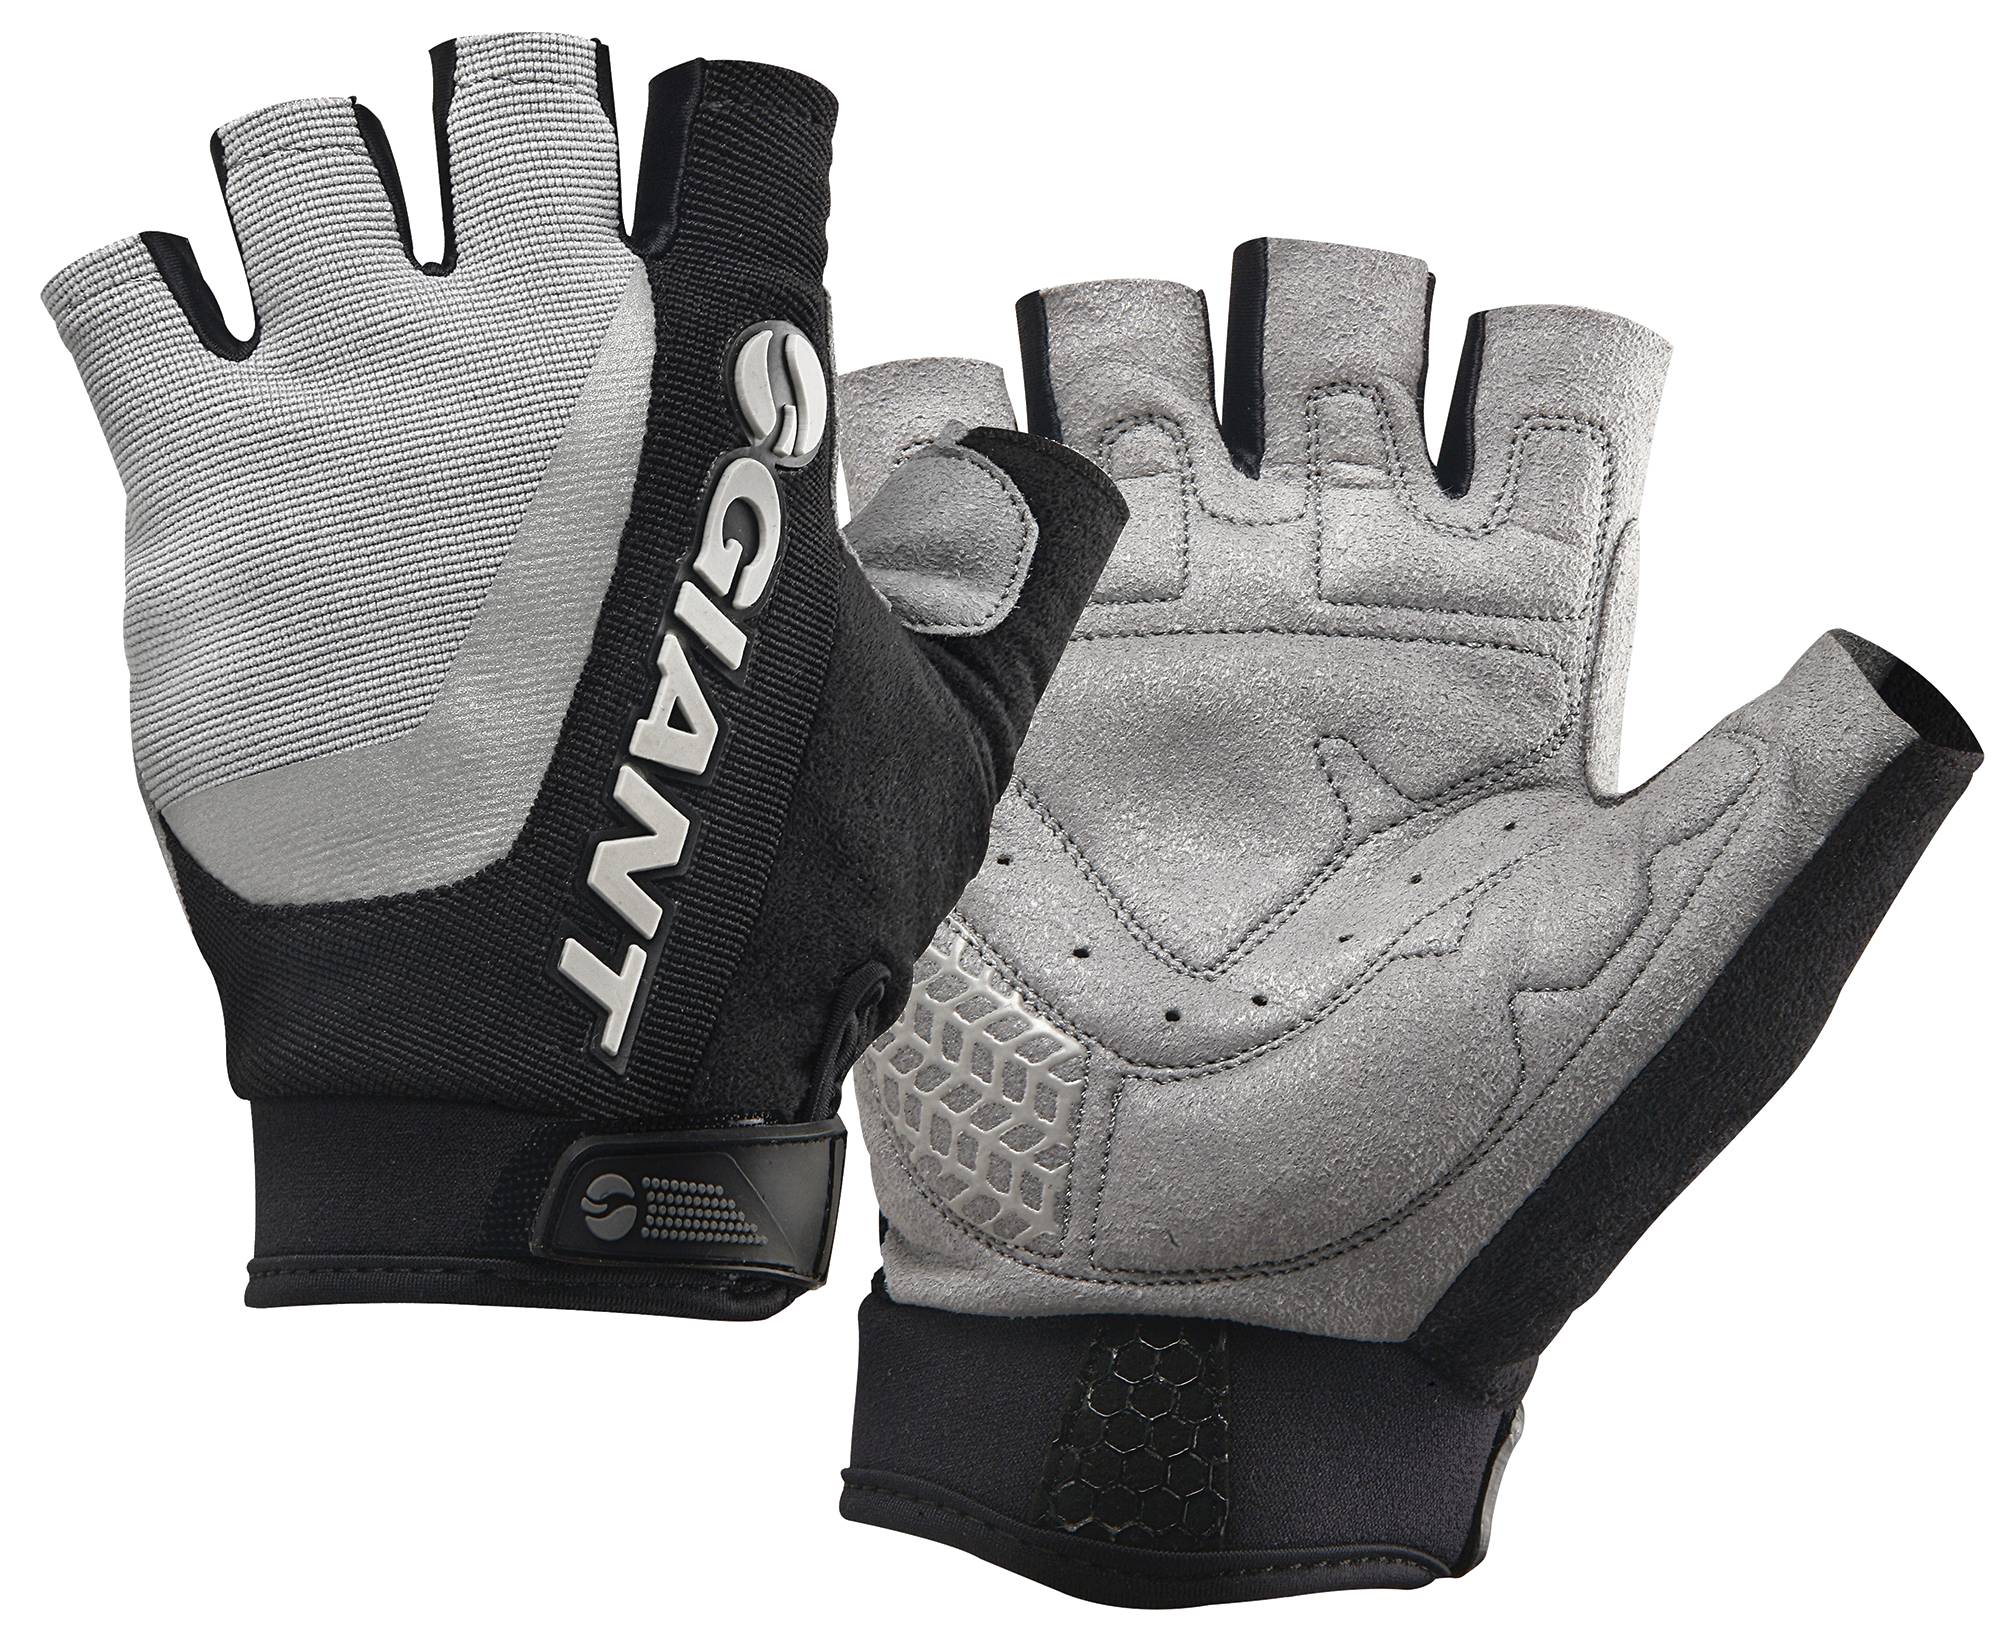 5638 Giant Tour SF Cycling Gloves Size Extra Large XL 